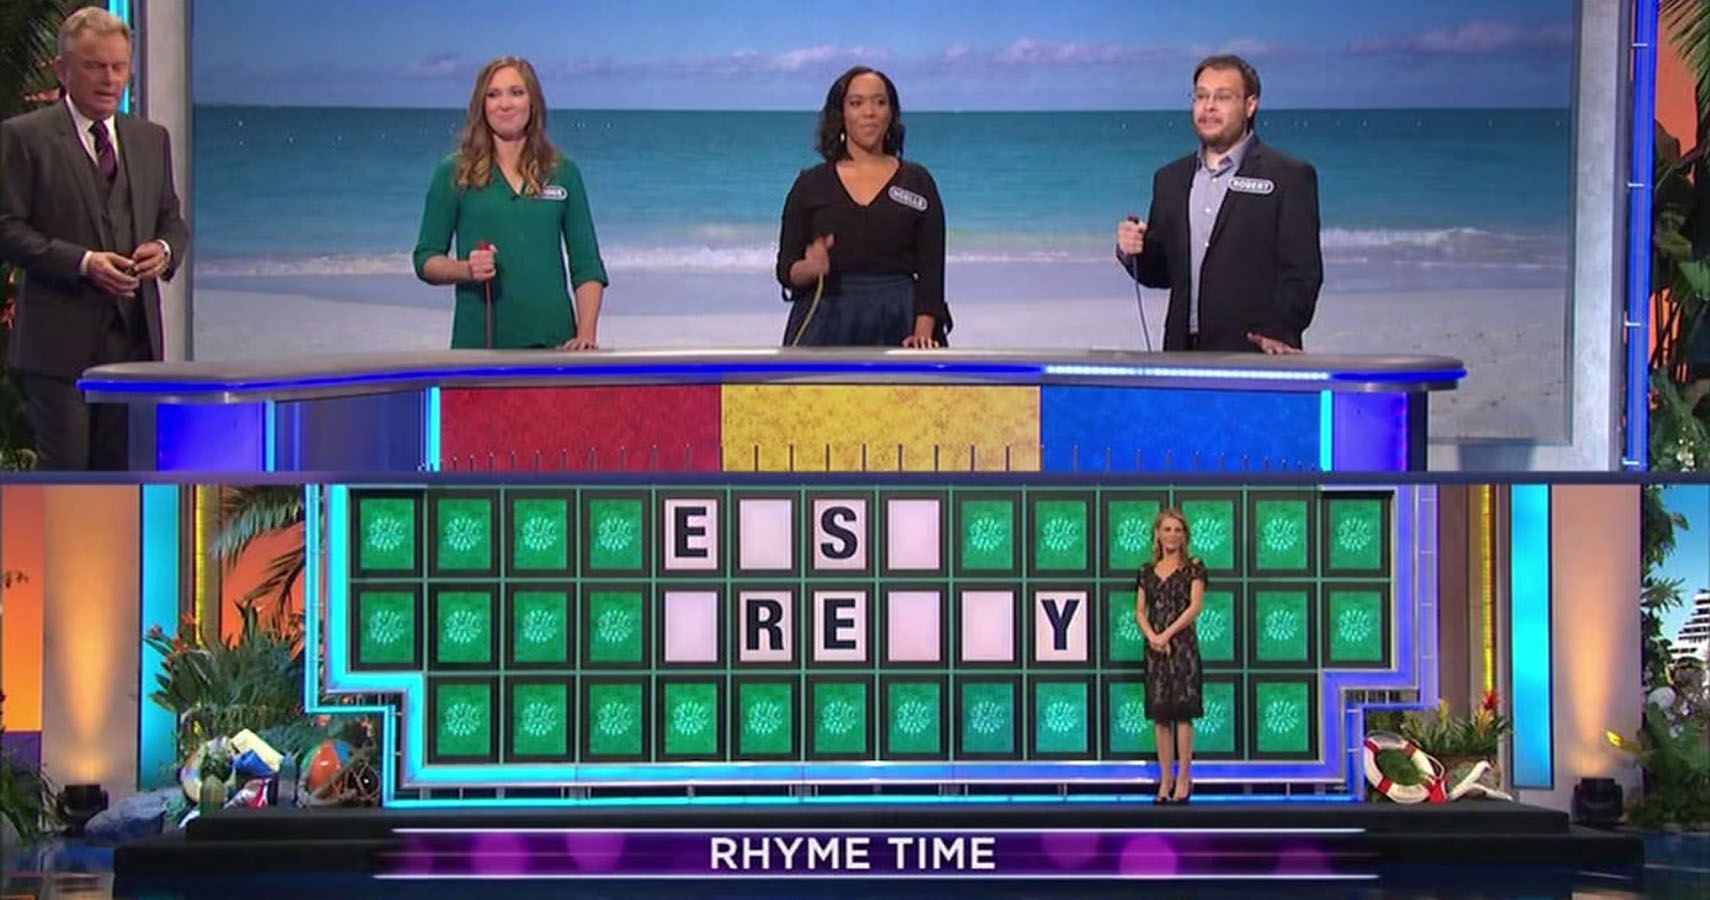 what travel agency does wheel of fortune use